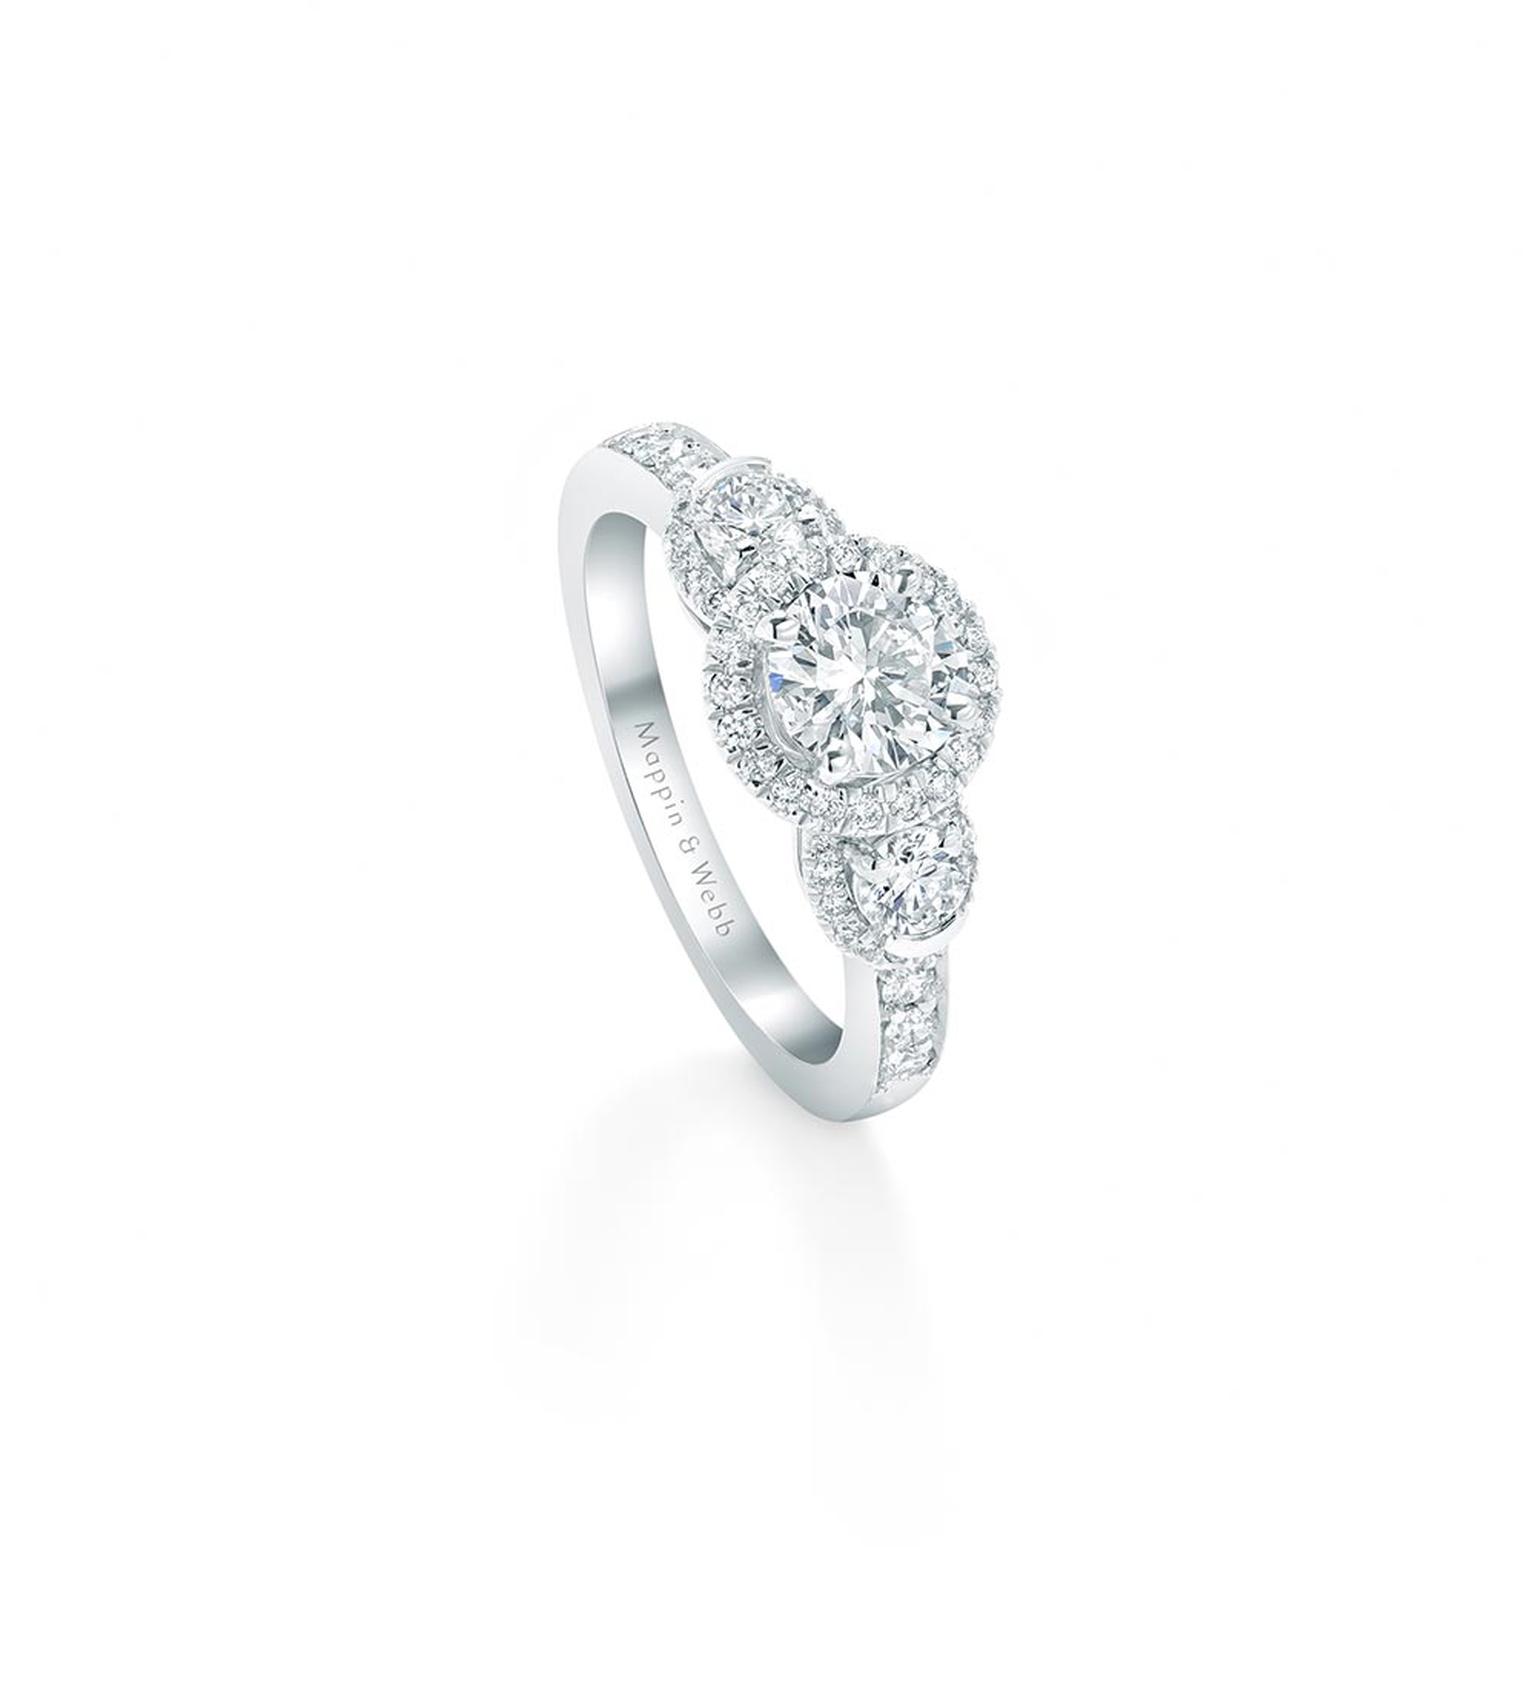 Mappin & Webb Eglantine engagement ring featuring a trio of diamonds encircled by a sparkling halo setting with ?a cushion-cut solitaire at its centre